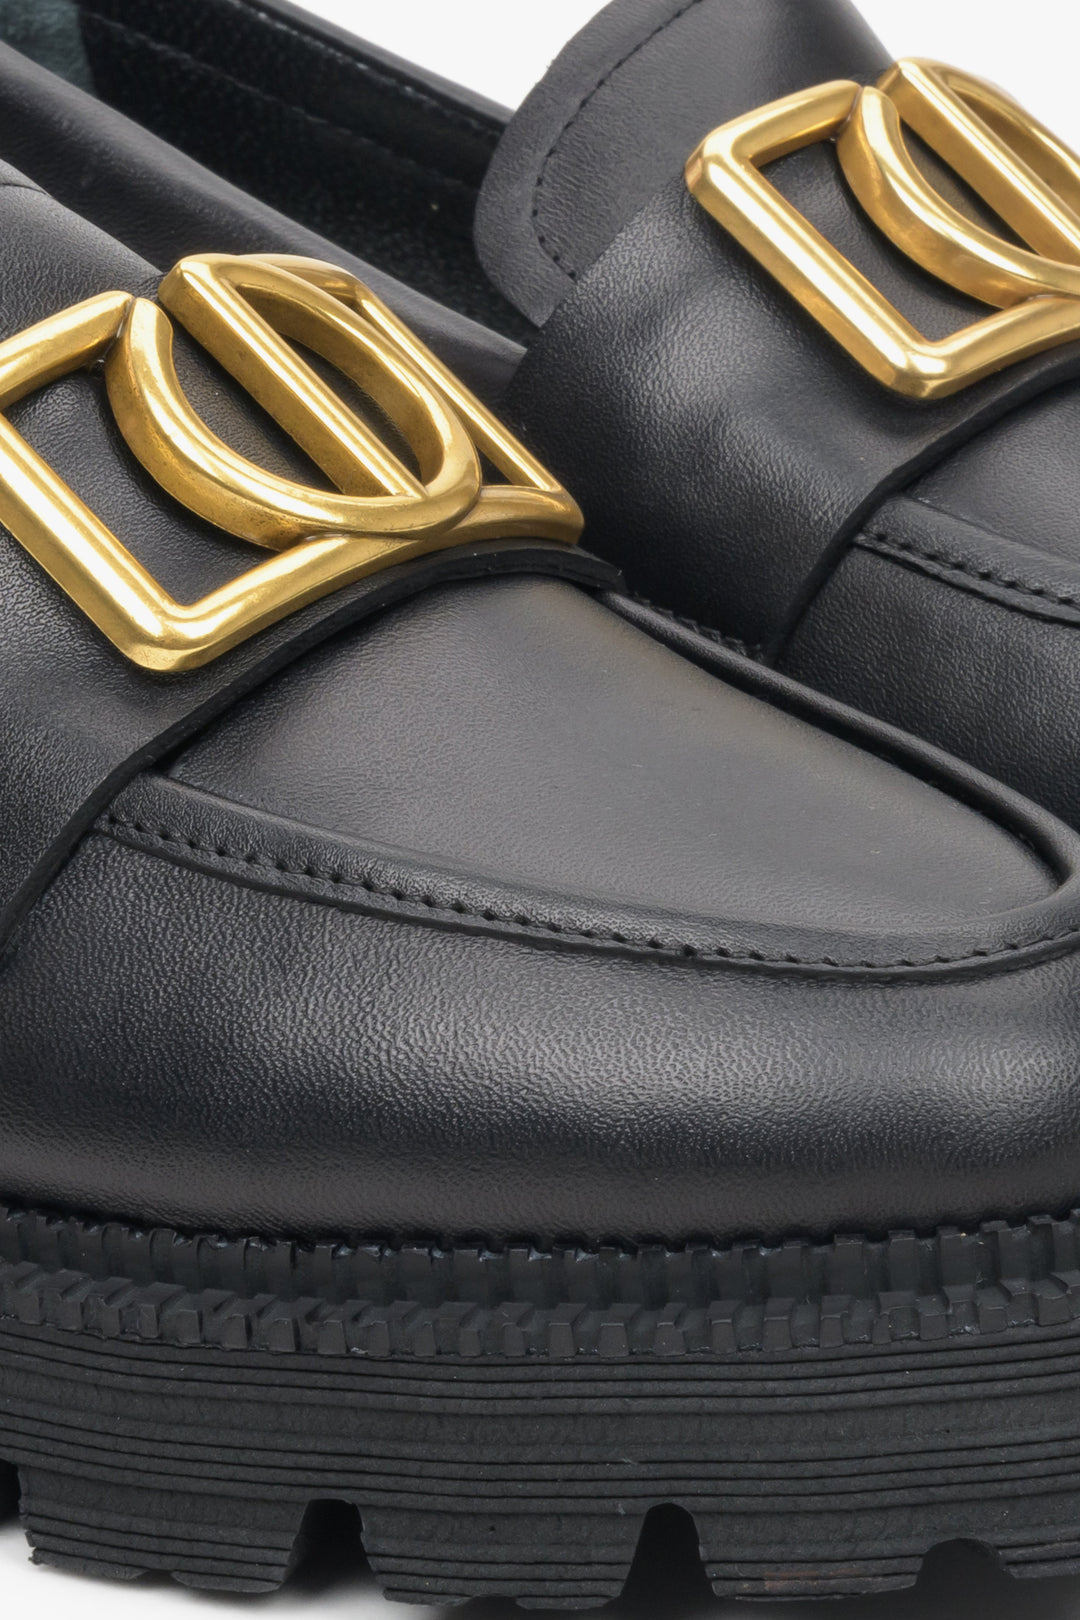 Women's black leather shoes with gold chain by Estro - a close-up on the details.